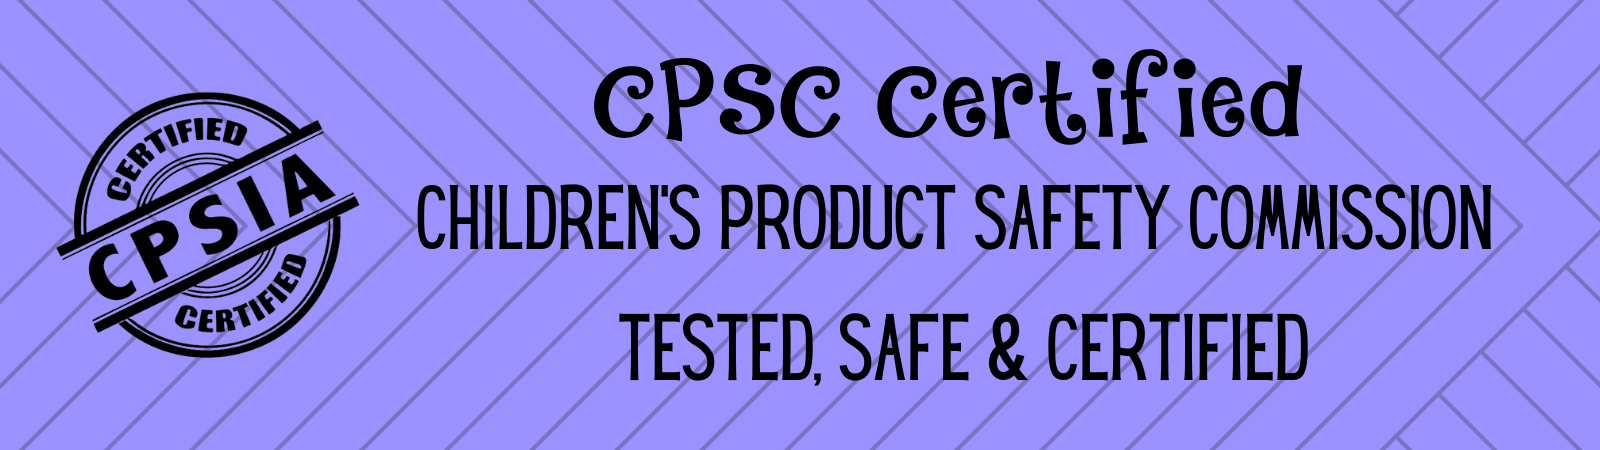 CPSC Certified Banner